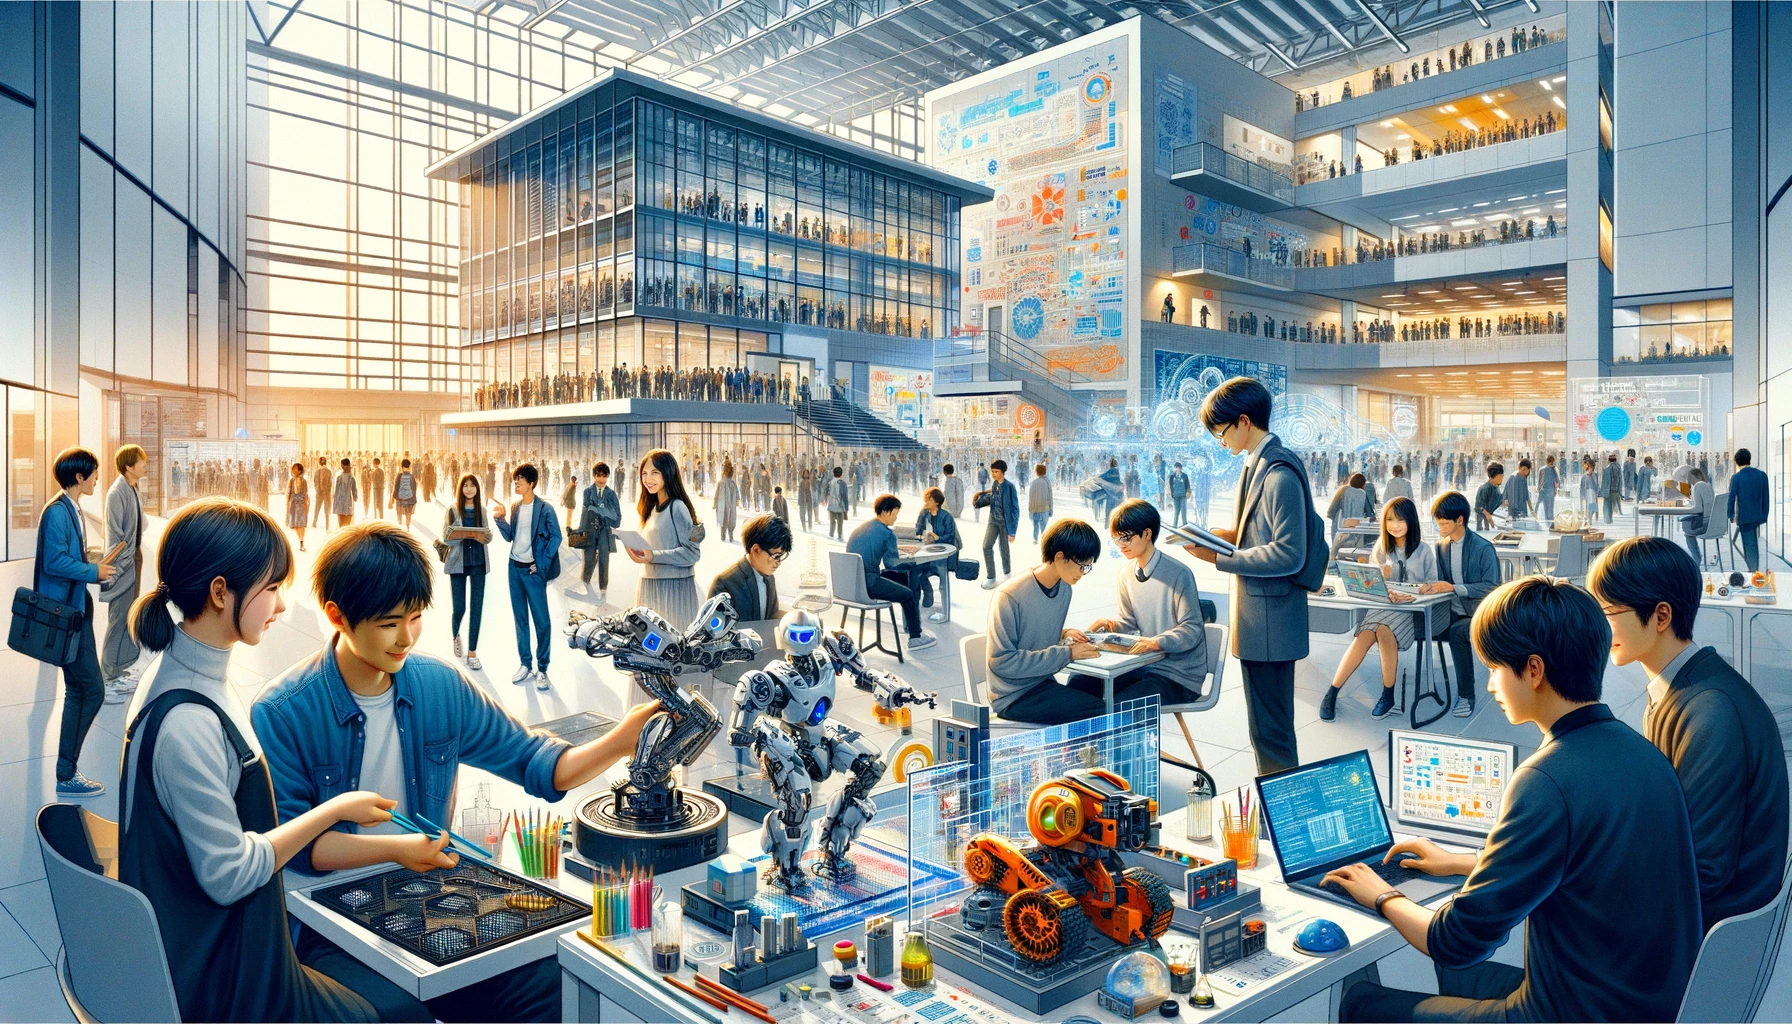 An inspiring campus scene at Shibaura Institute of Technology in Japan, showcasing why it is popular. The image features students of various Asian descents engaged in advanced engineering and technological activities. Students are seen working on robotics, programming in computer labs, and conducting scientific experiments in state-of-the-art facilities. The campus includes modern buildings with sleek designs and high-tech environments. Some students collaborate on projects while others present their innovative ideas to peers. The atmosphere is dynamic and future-focused, illustrating a hub of innovation and learning.